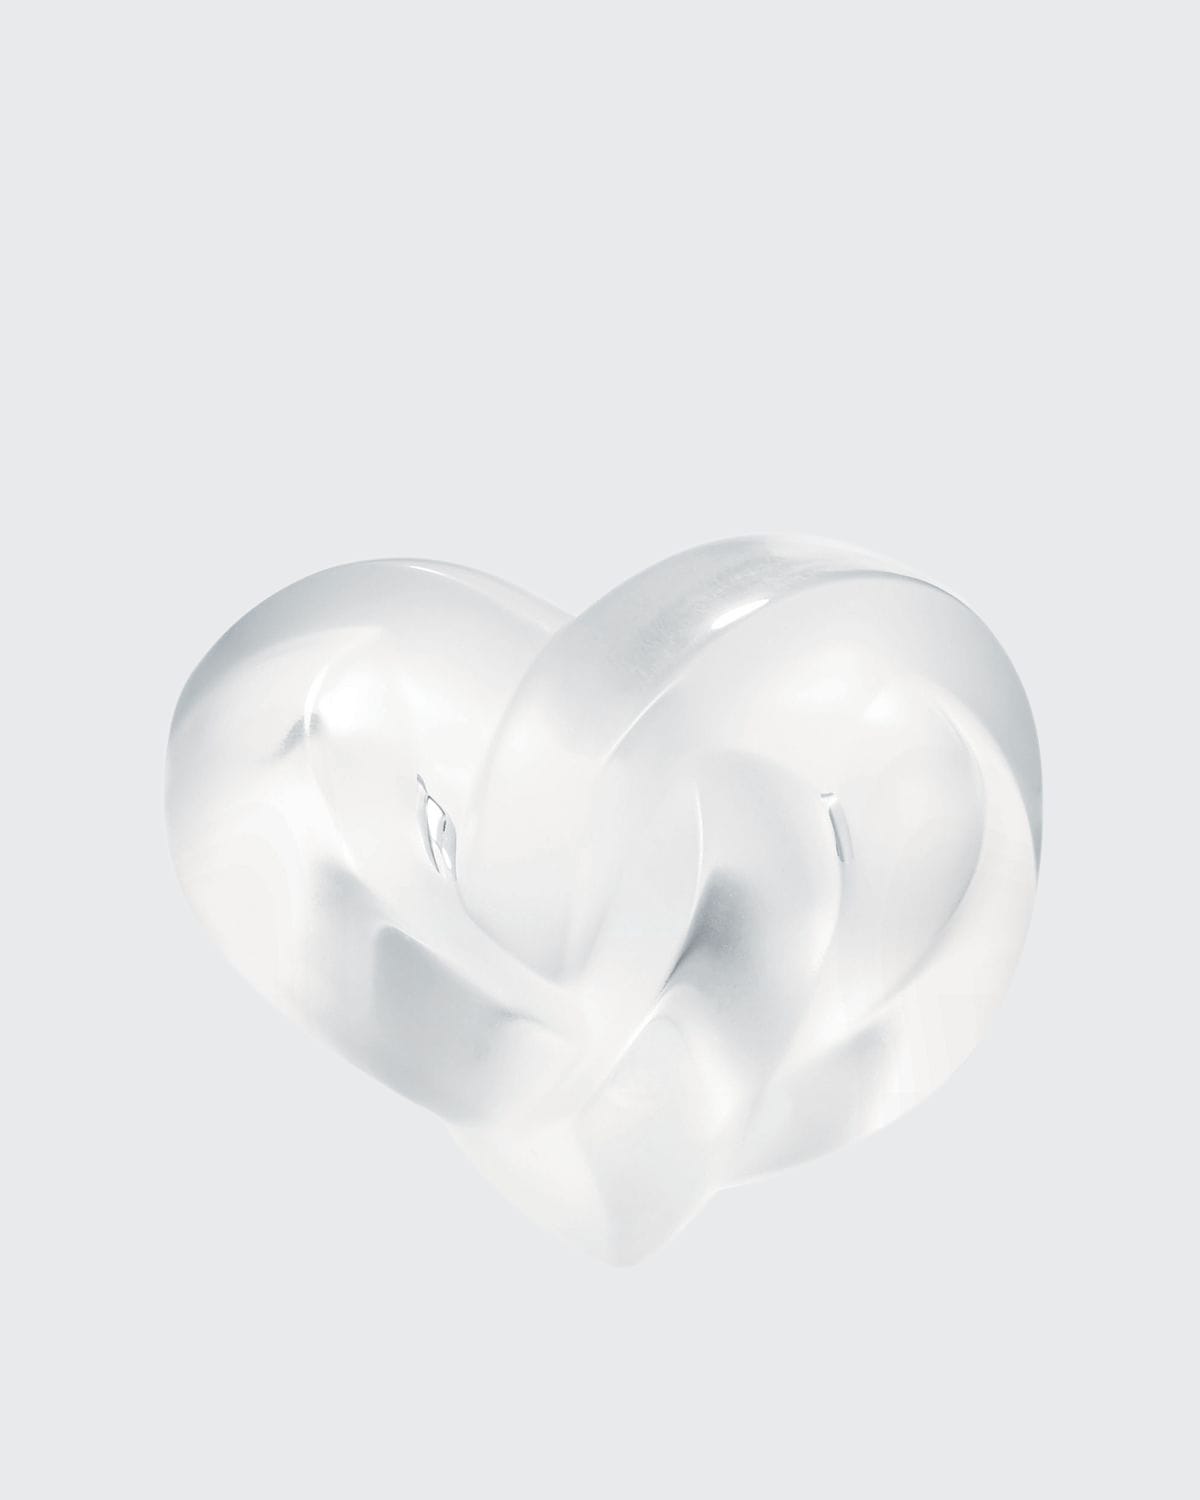 Lalique Clear Heart Paperweight